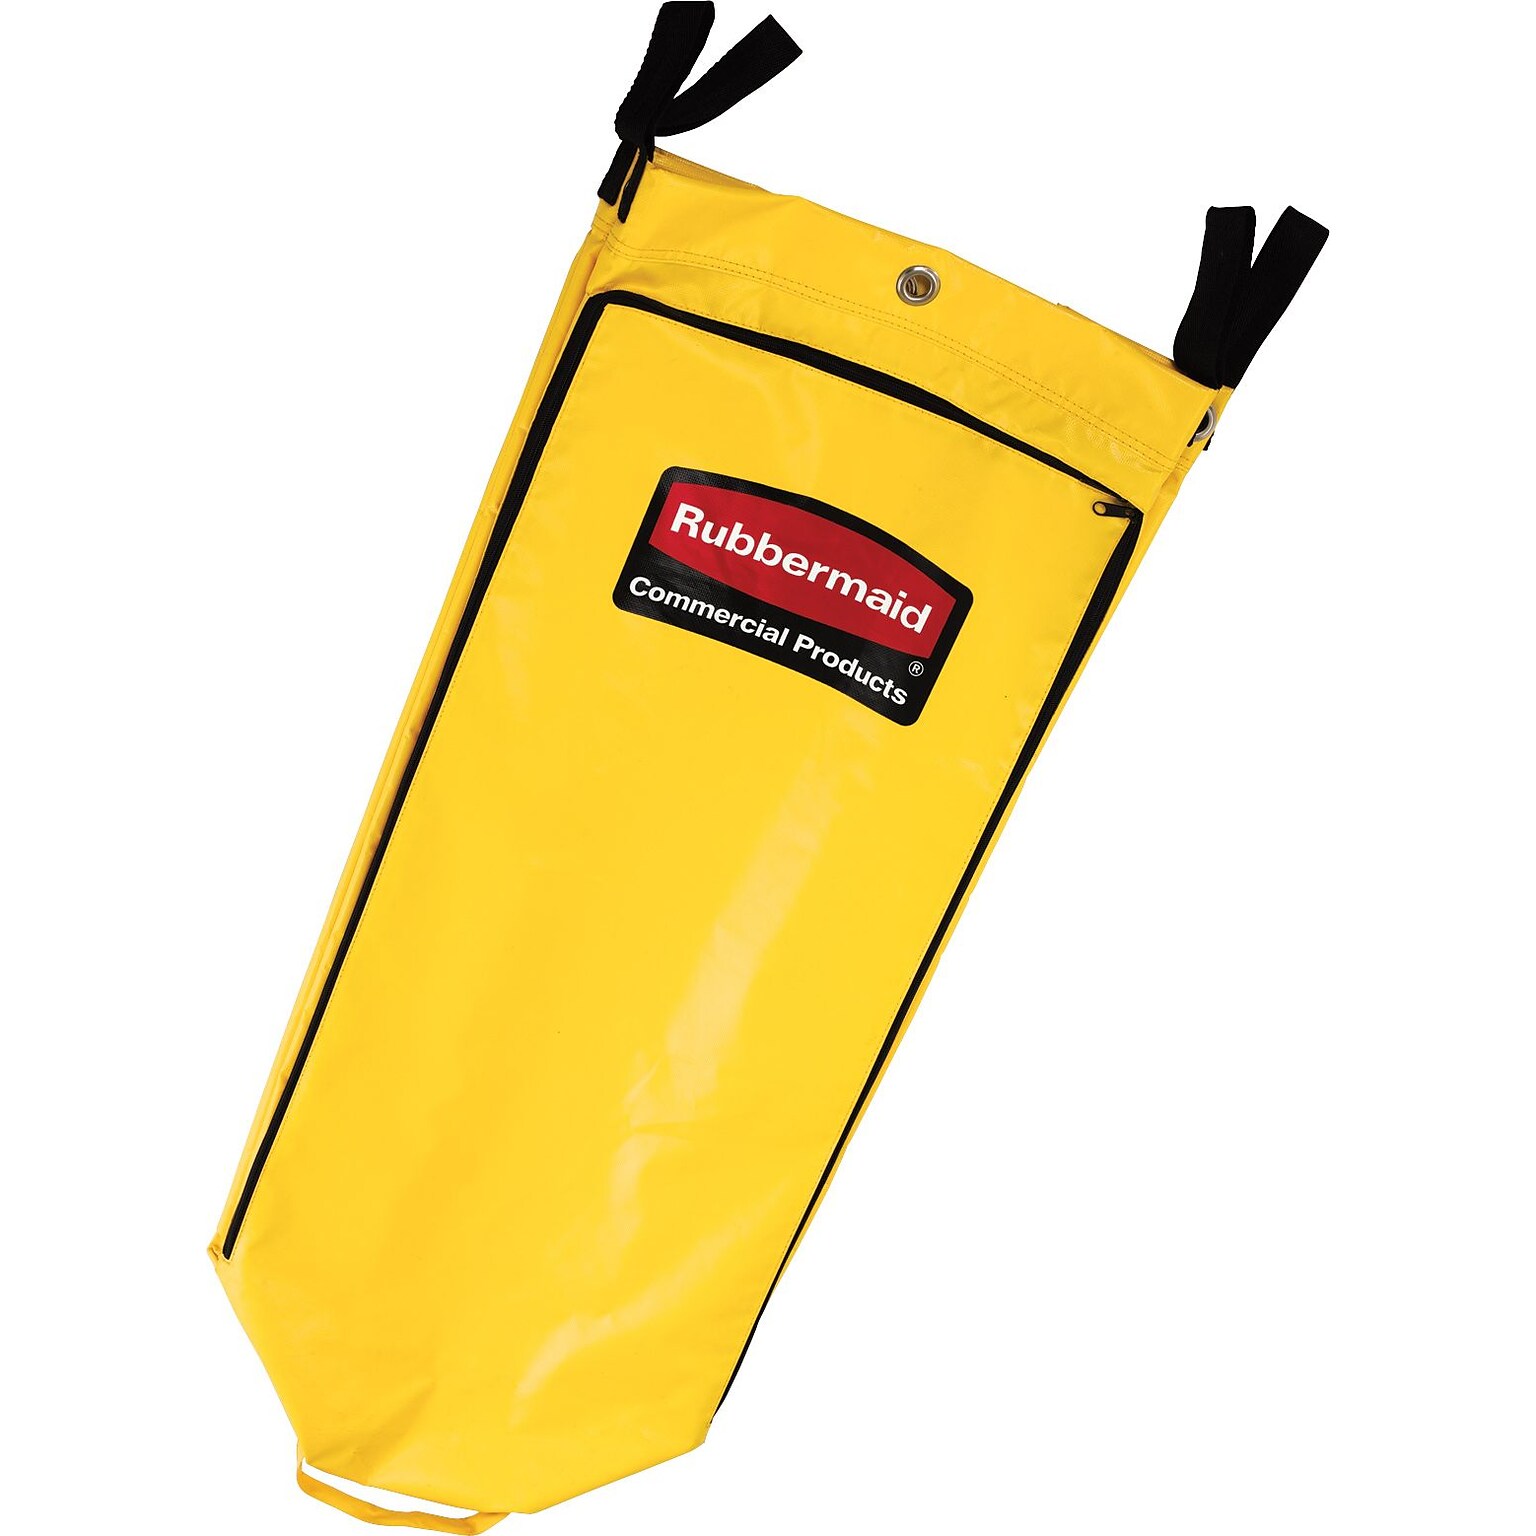 Rubbermaid Commercial Cleaning Cart Replacement Bag, Yellow Vinyl, 34 gal. Capacity (1966881)